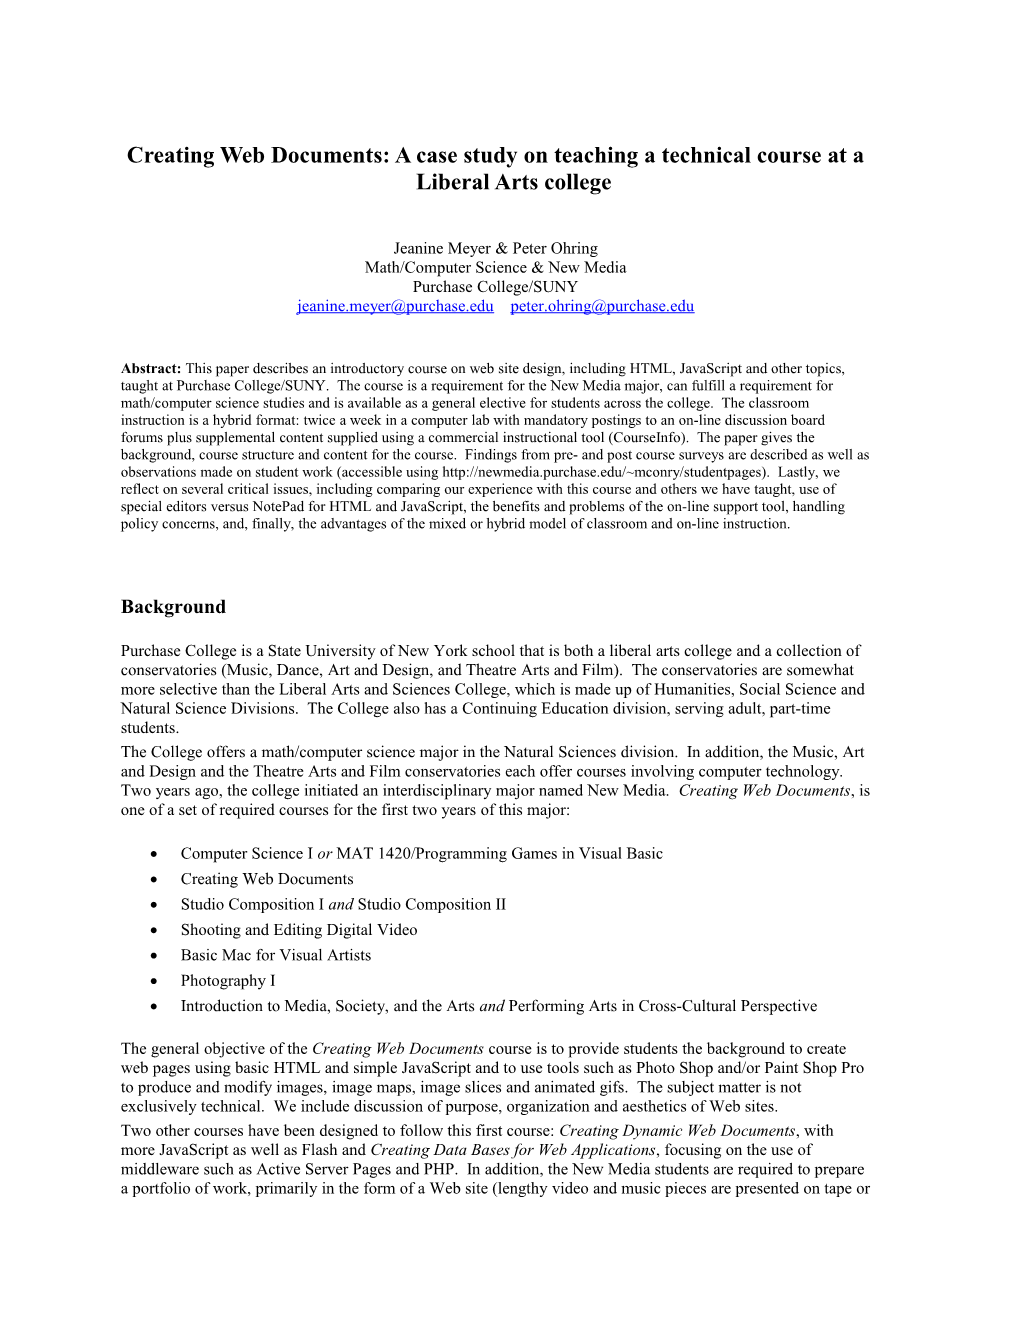 Creating Web Documents: a Case Study on Teaching a Technical Course at a Liberal Arts College